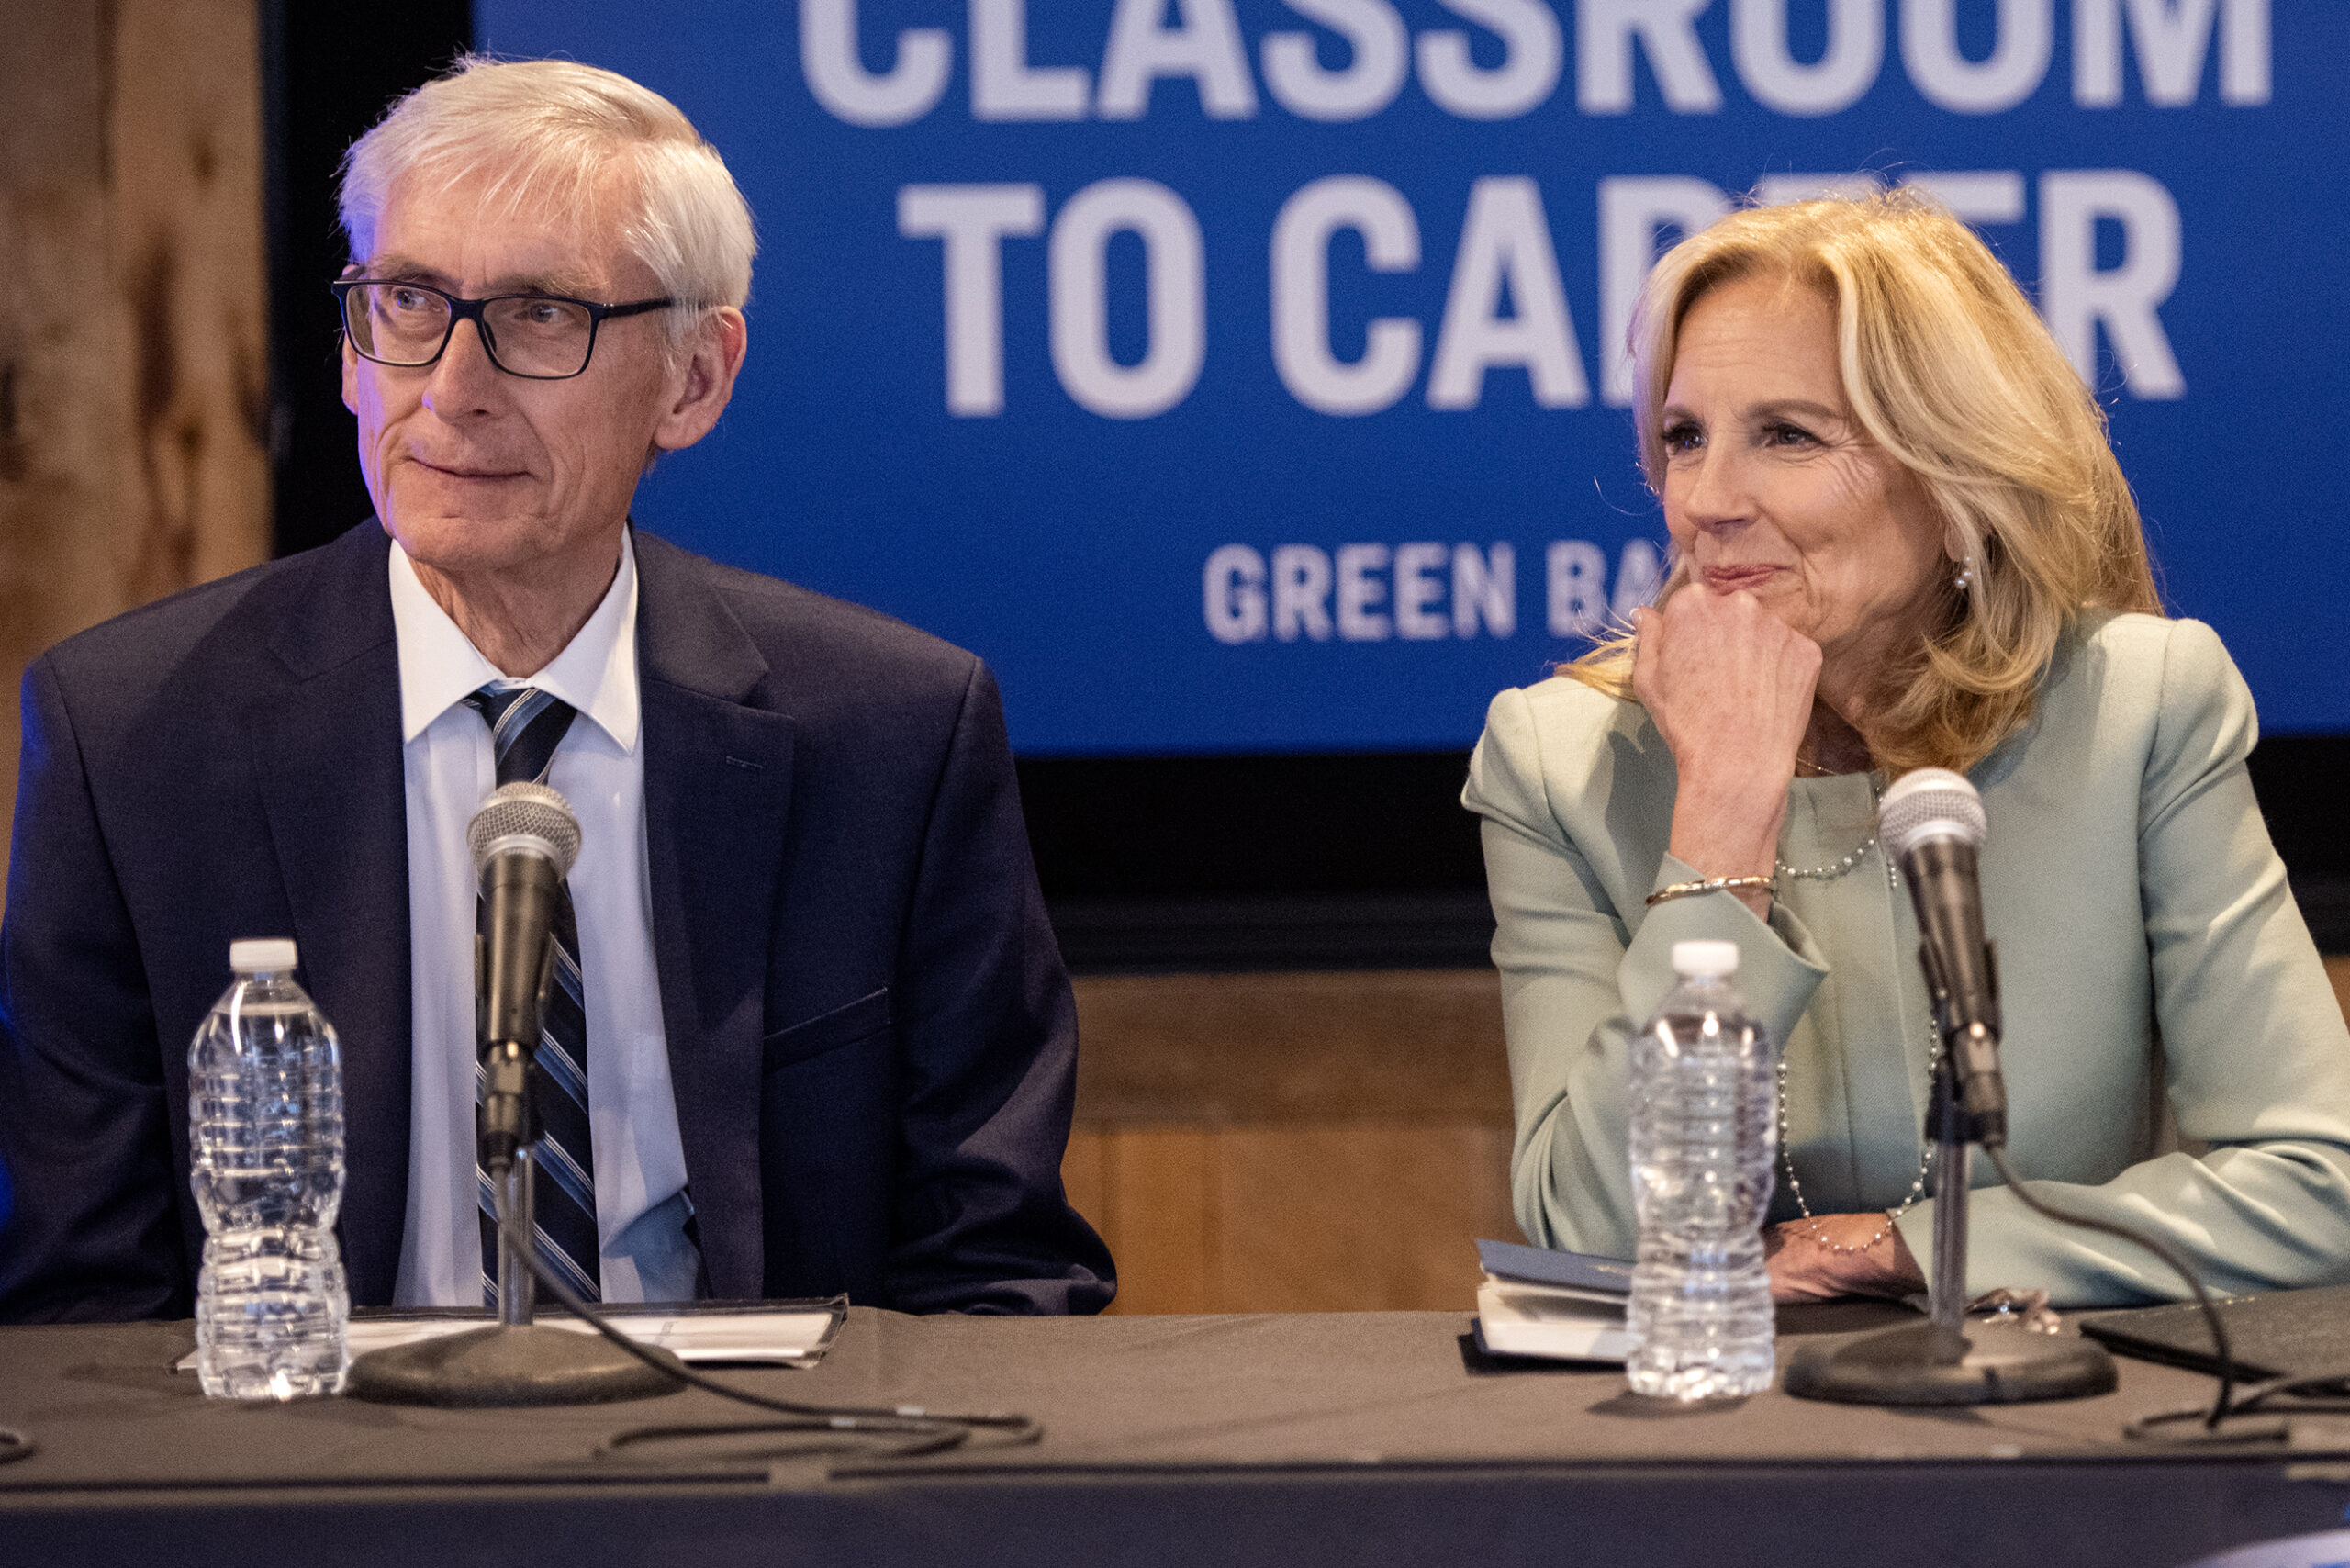 Jill Biden rests her head on her hand as she smiles. Tony Evers sits next to her.